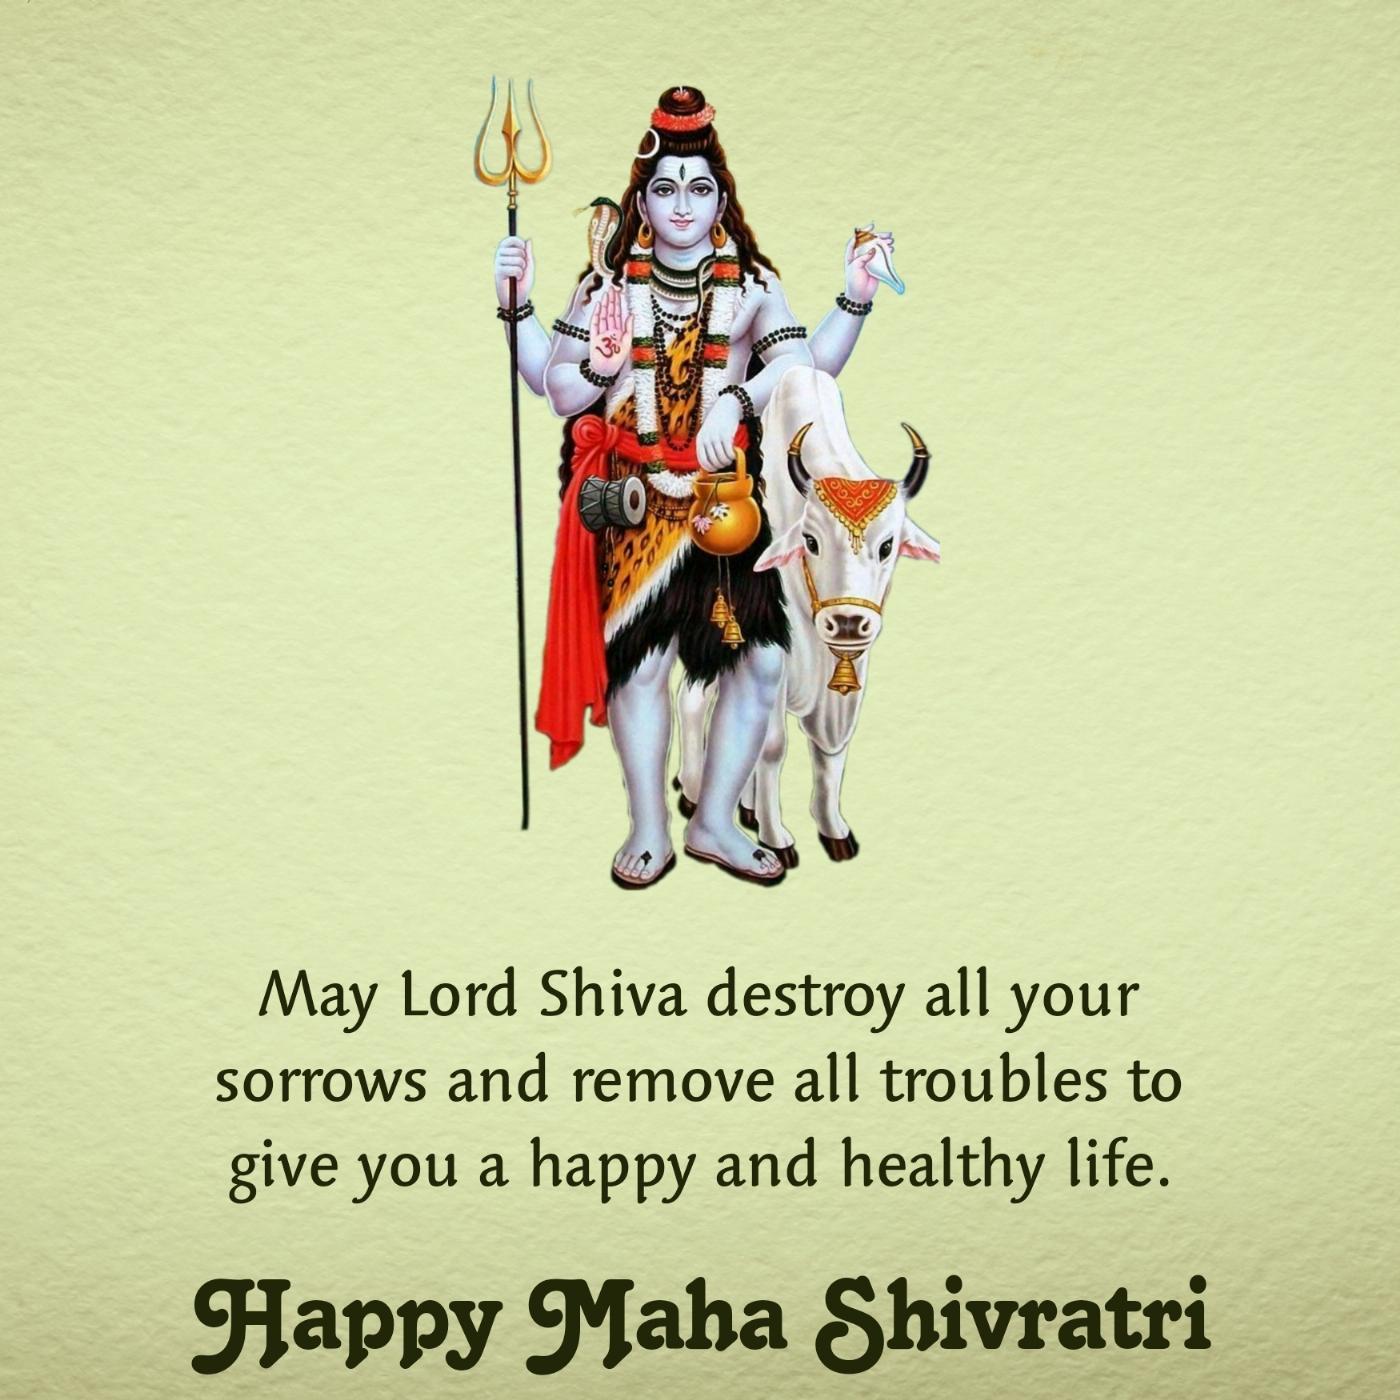 May Lord Shiva destroy all your sorrows and remove all troubles